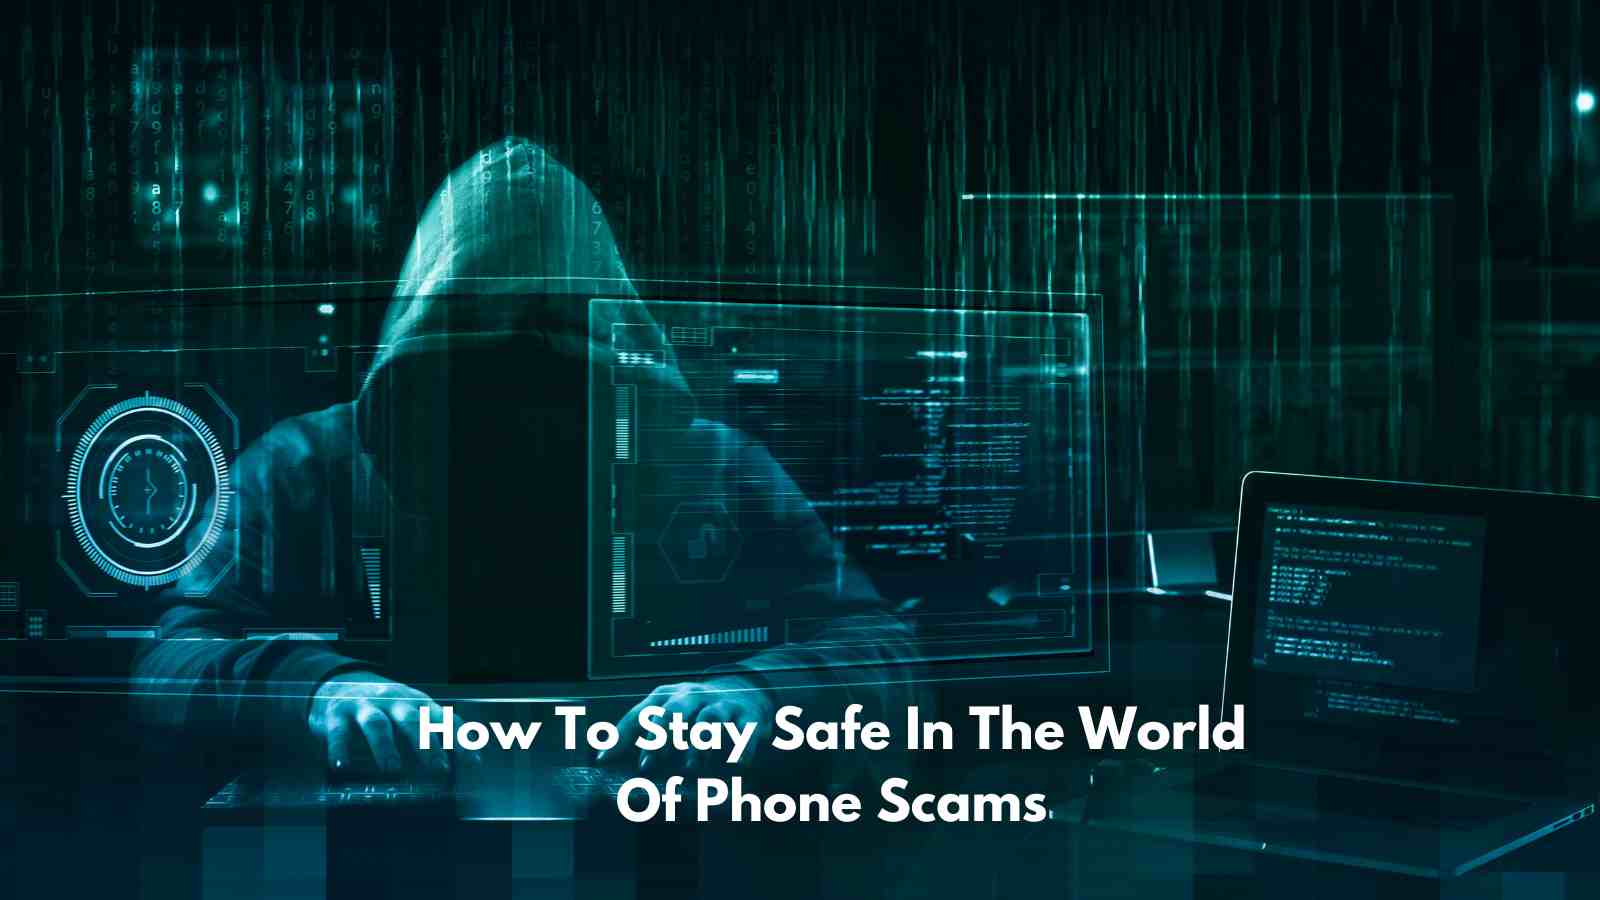 How To Stay Safe In The World Of Phone Scams